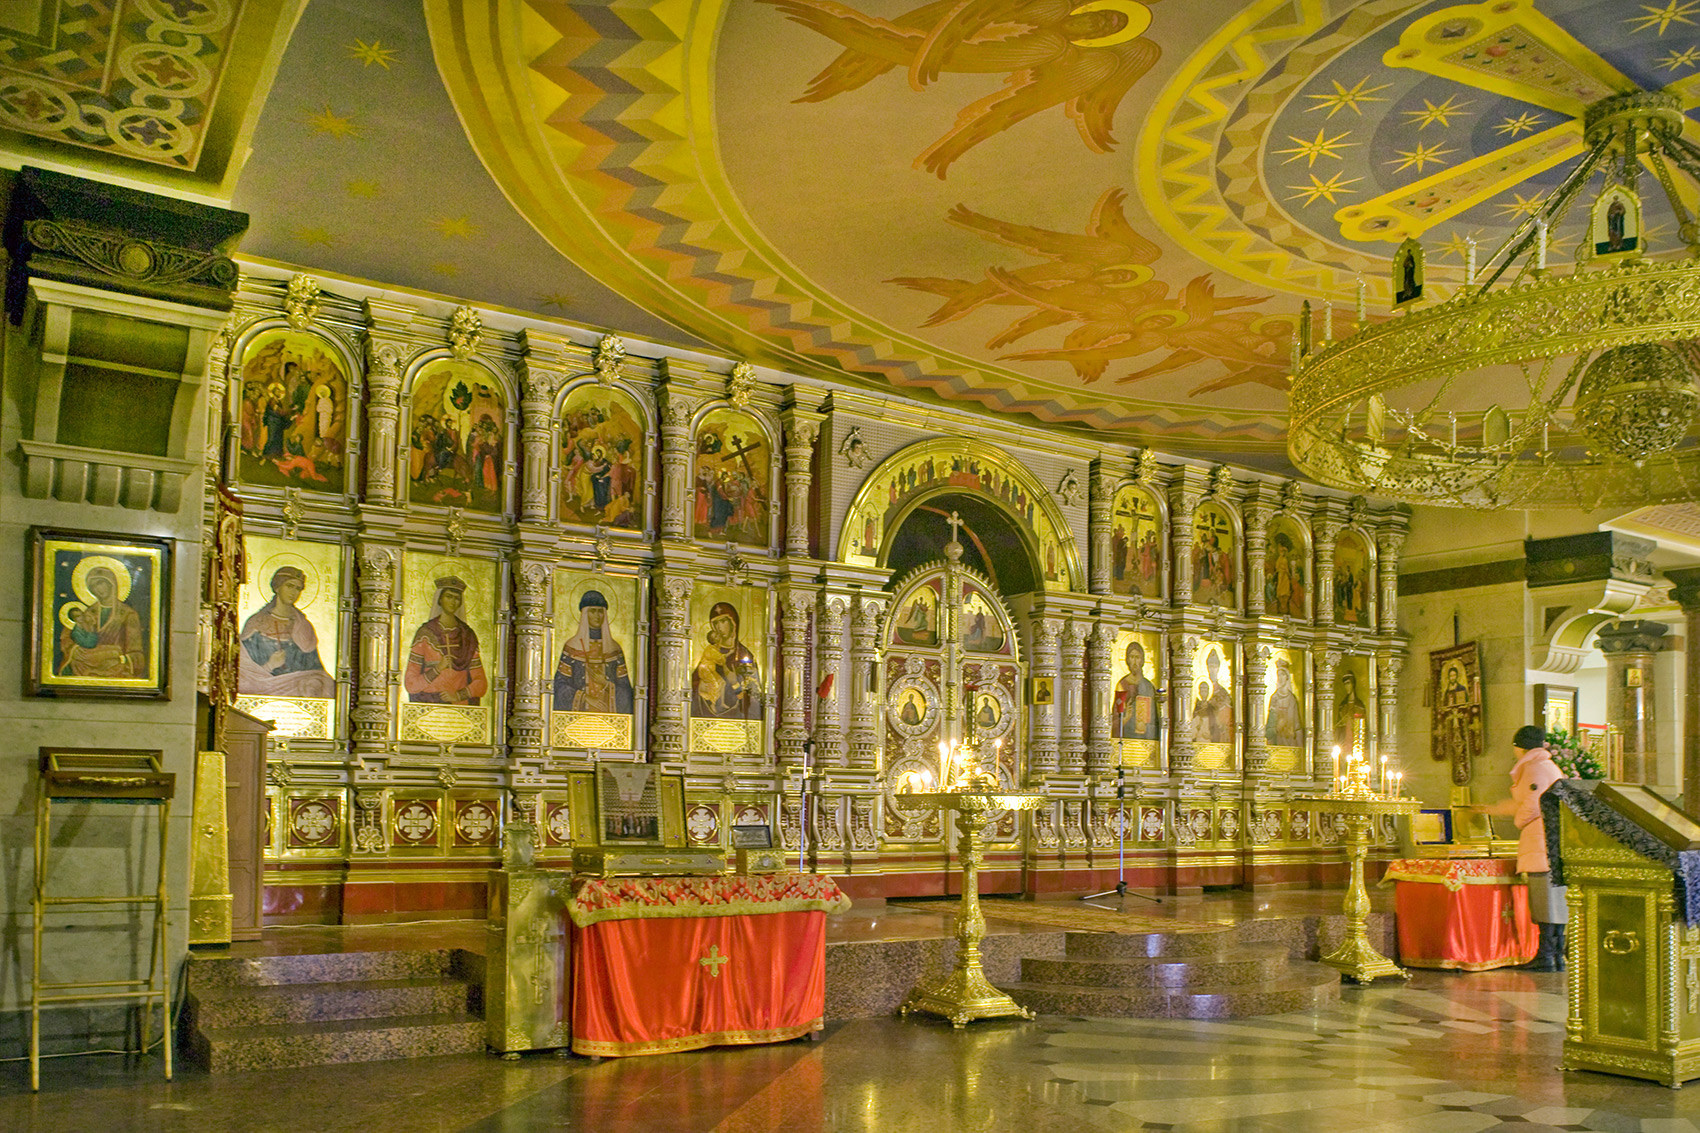 Church of All Saints Resplendent in the Russian Land. Interior view of lower church dedicated to the New Martyrs and Witnesses of the Russian Church. April 3, 2017.